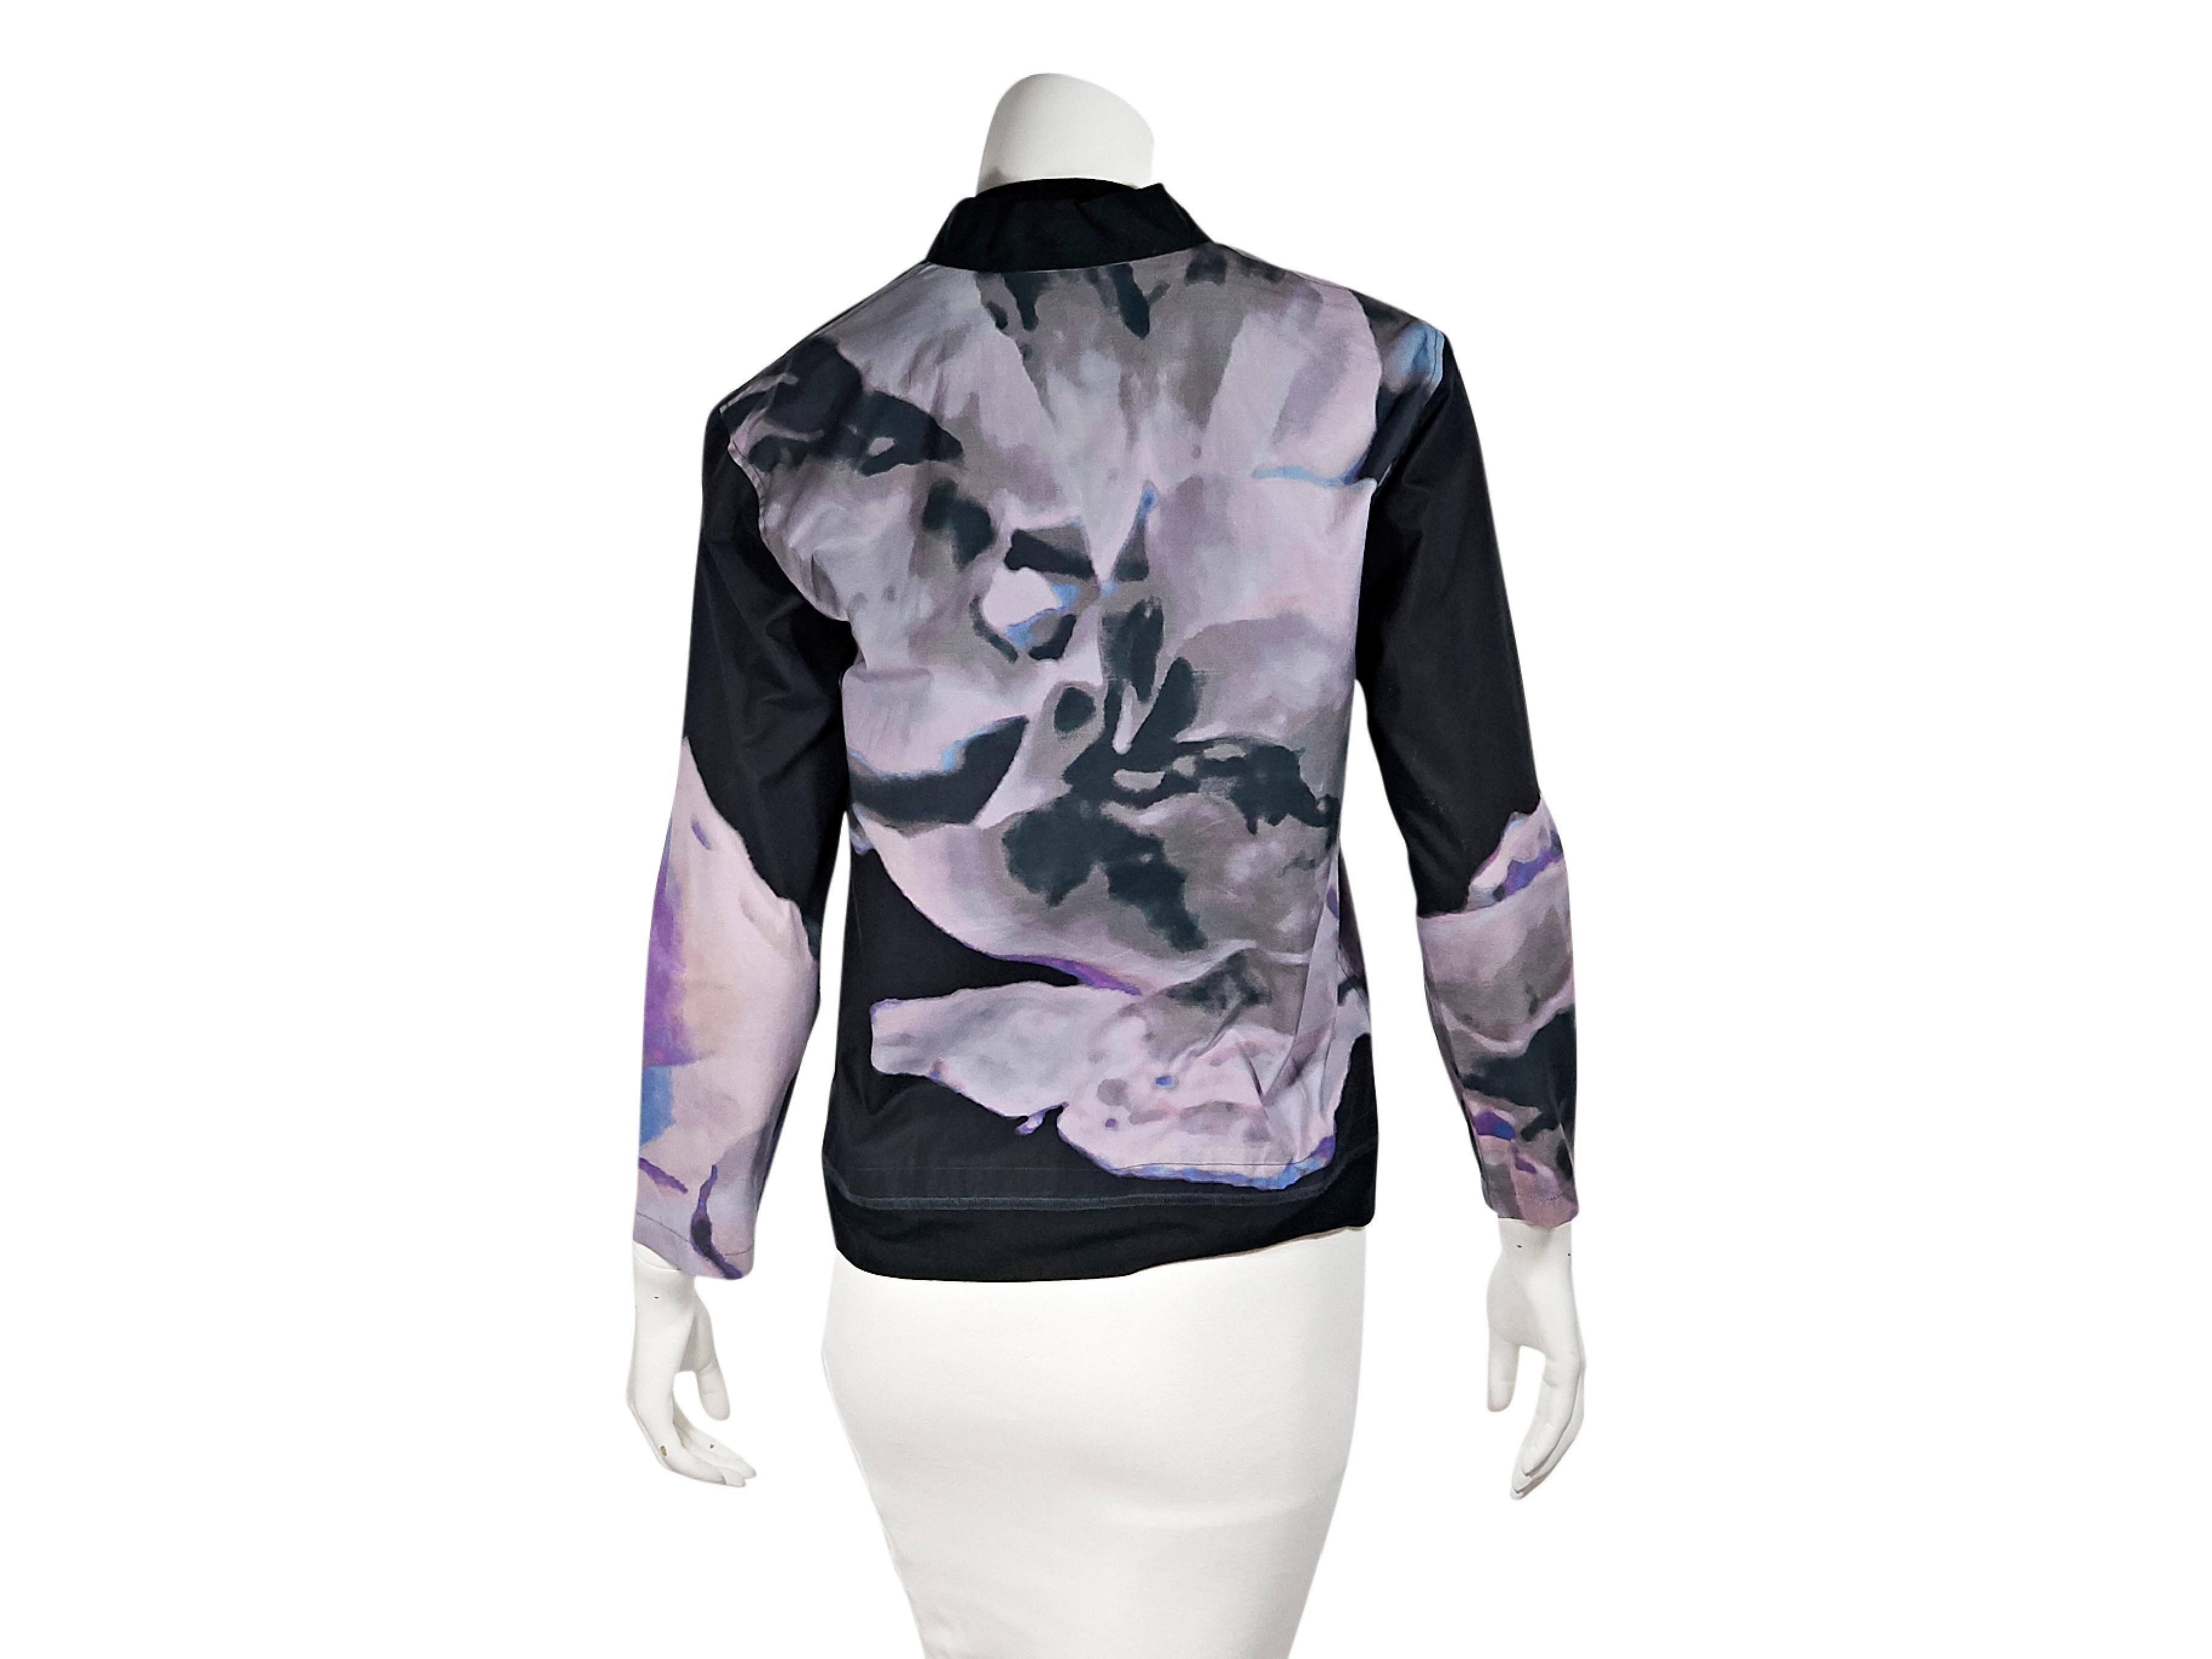 Product details:  Multicolor abstract-printed shirt and tank set by Issey Miyake.  Mock neck.  Three-quarter length sleeves.  Concealed front closure.  Coordinating shell top.  Sleeveless.  Pullover style.  Shirt:  35